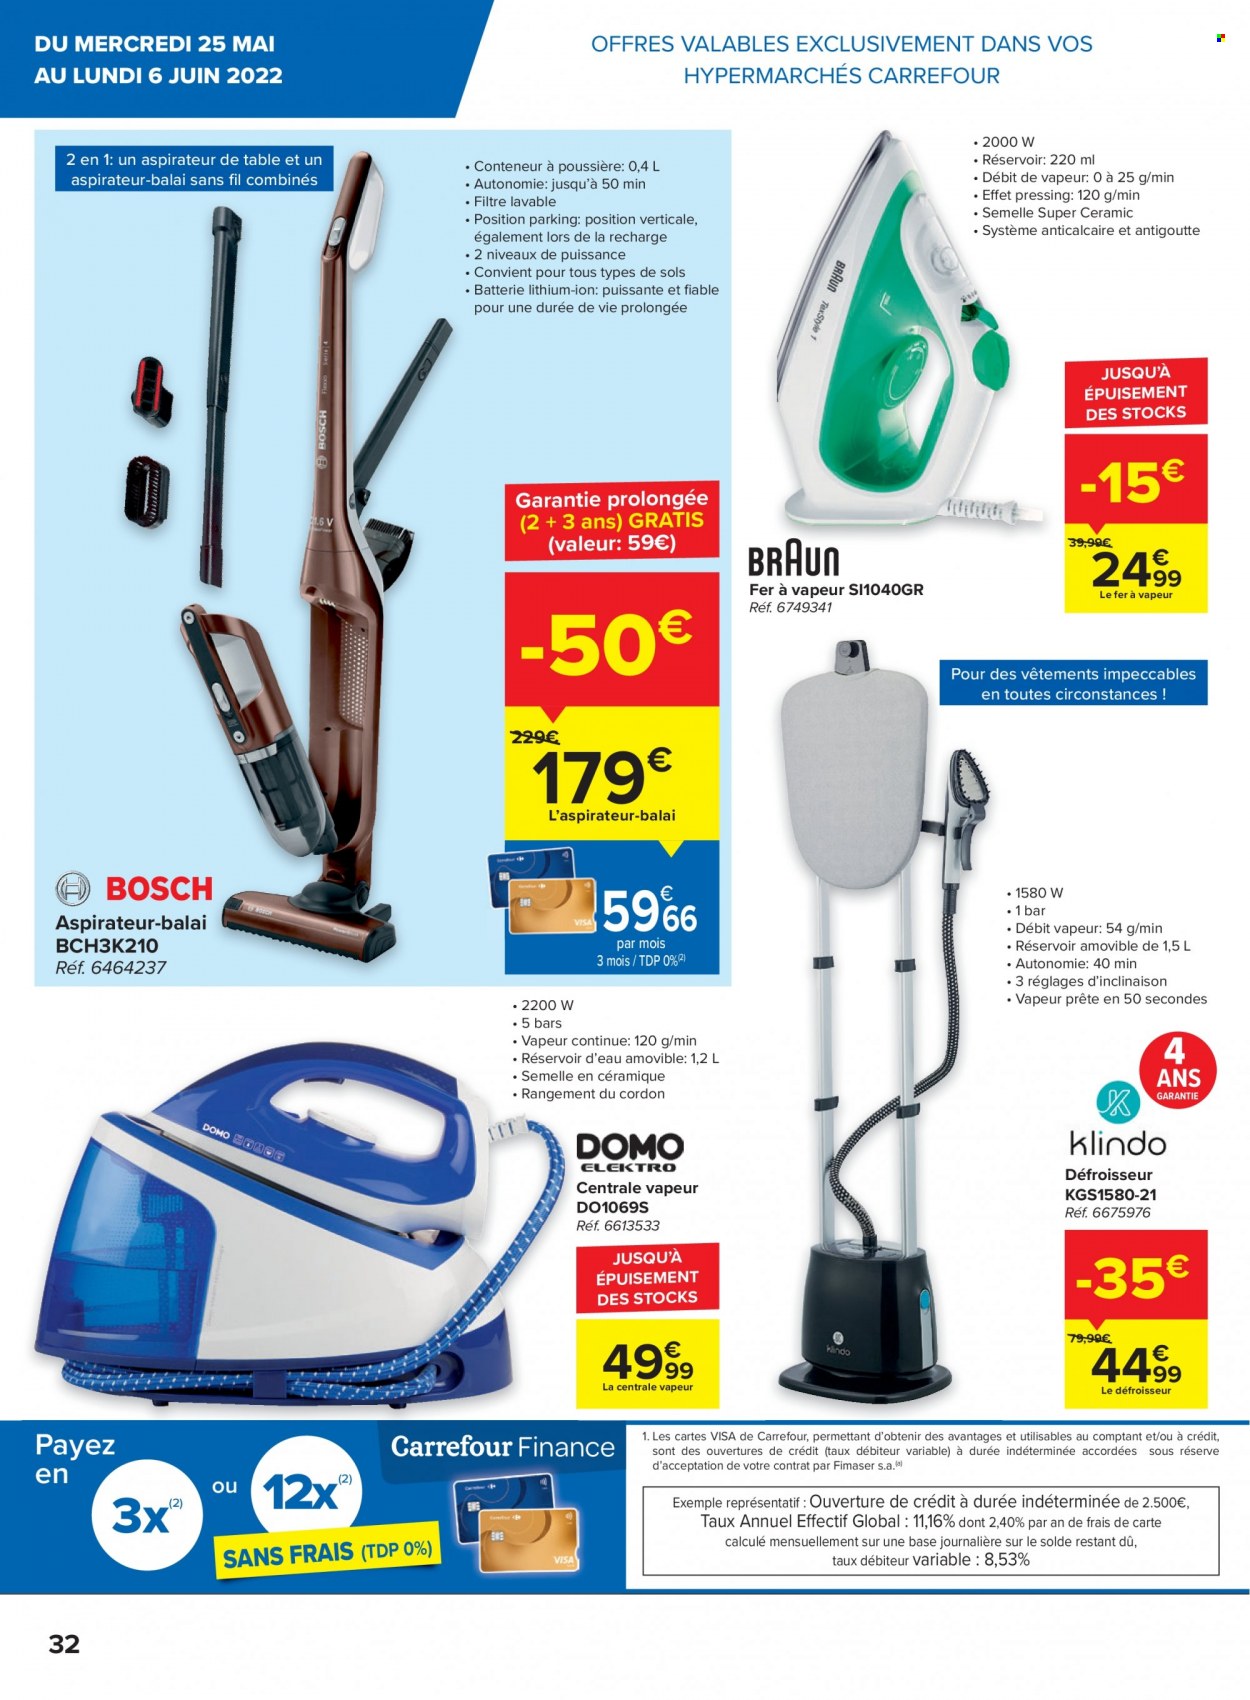 Catalogue Carrefour hypermarkt - 25.5.2022 - 31.5.2022. Page 32.